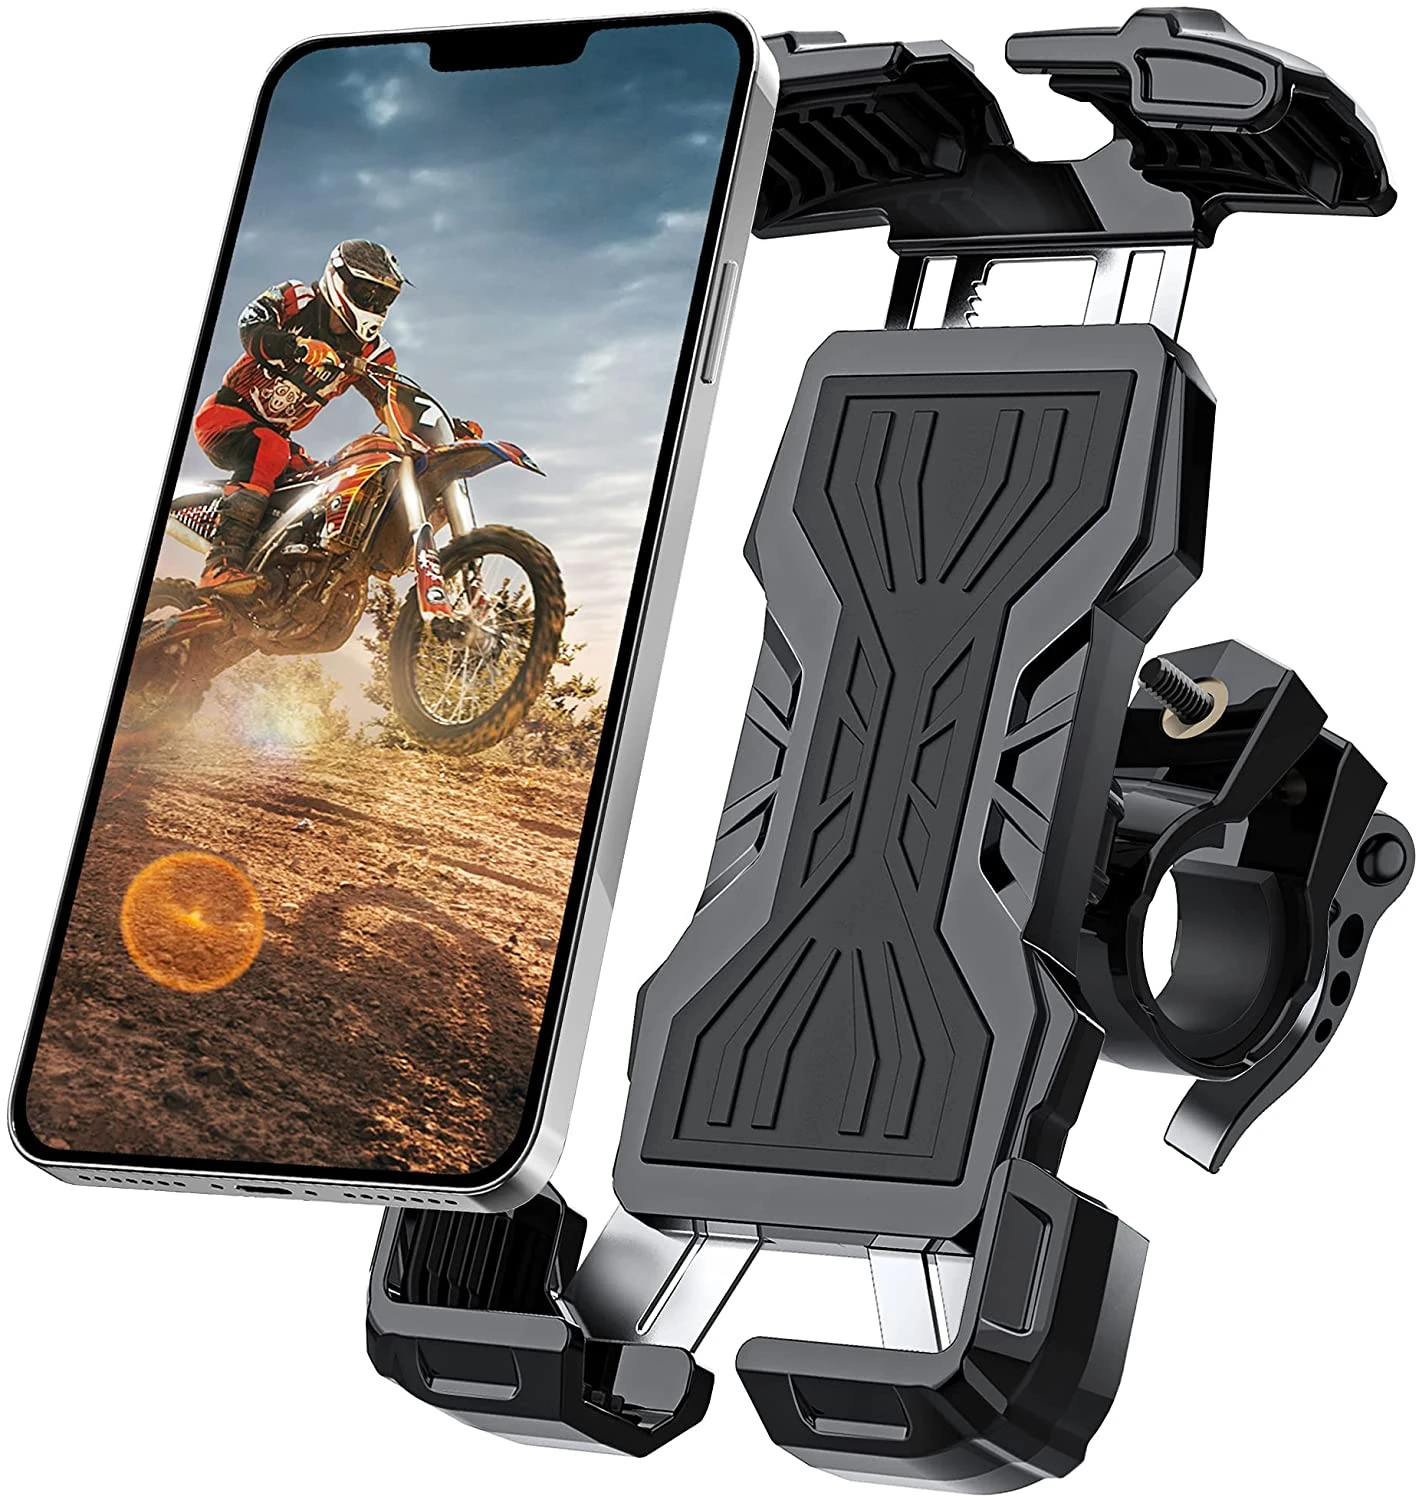 Haven onhandig Lui Bike Phone Holder Bicycle Mobile Cellphone Holder Motorcycle Suporte  Celular For iPhone Samsung Xiaomi Gsm Houder Fiets|Phone Holders & Stands|  - AliExpress